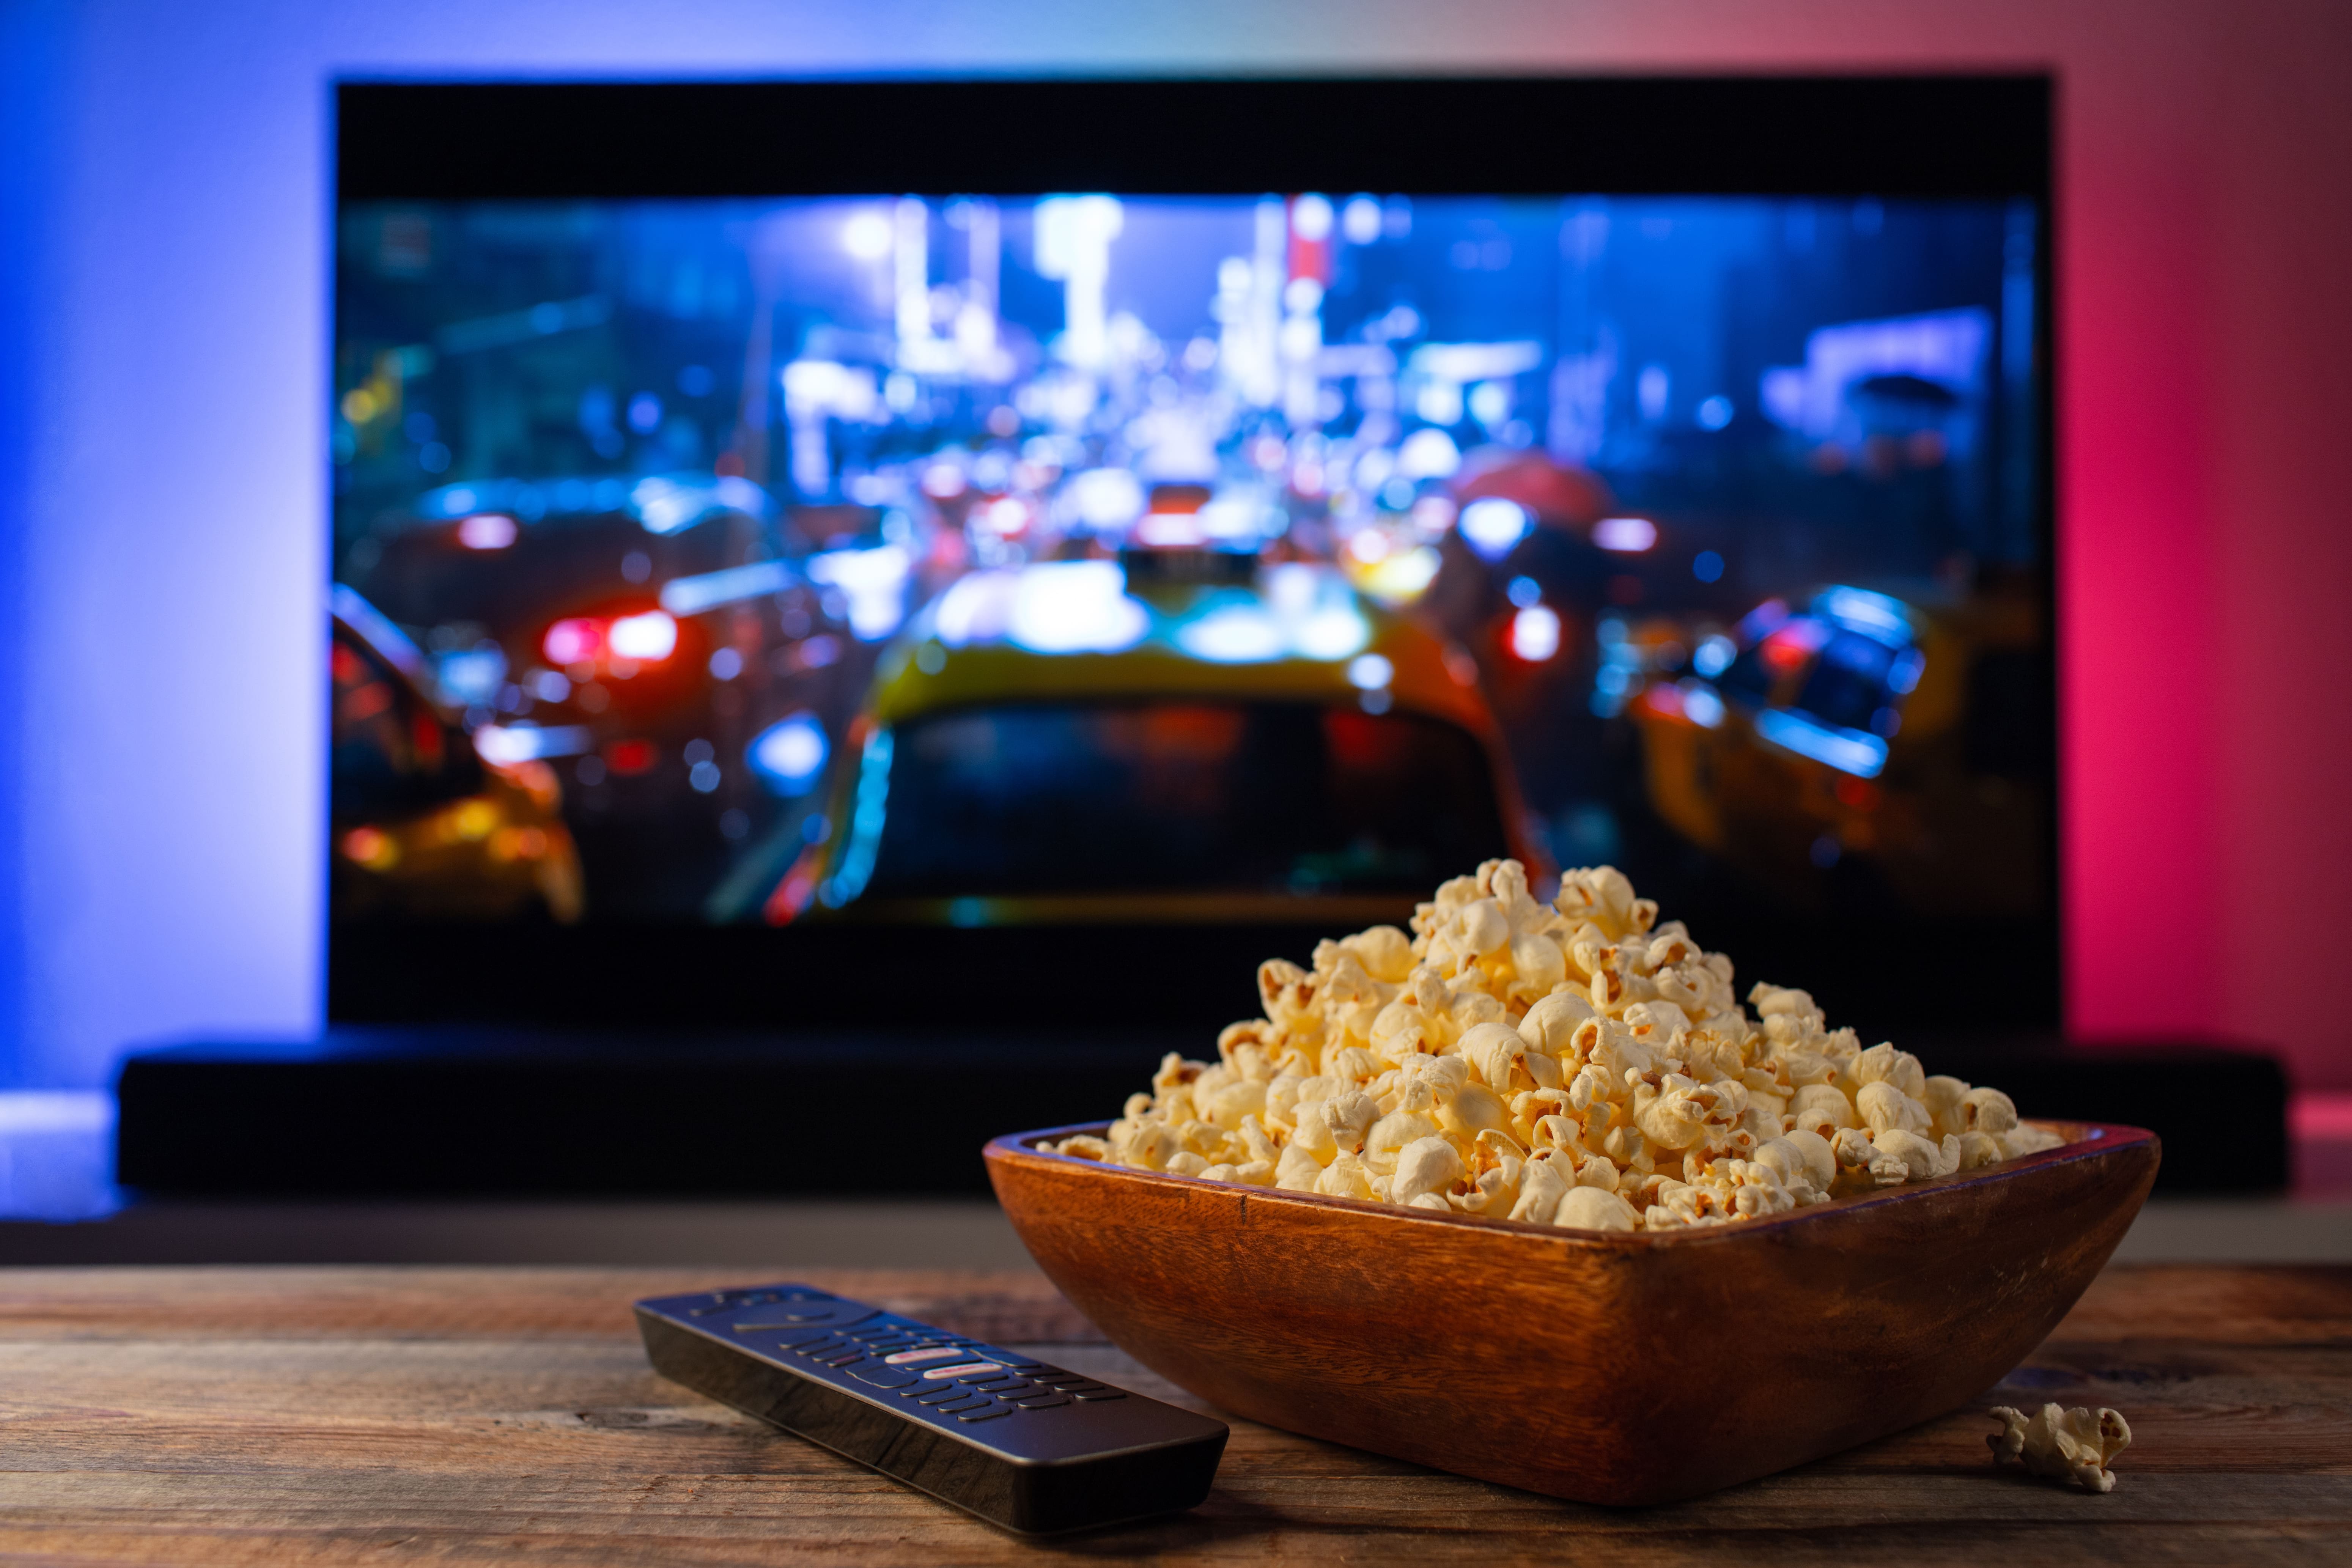 A wooden bowl overflowing with popcorn sat on a wooden coffee table next to the remote in front of a movie on a flat screen TV.